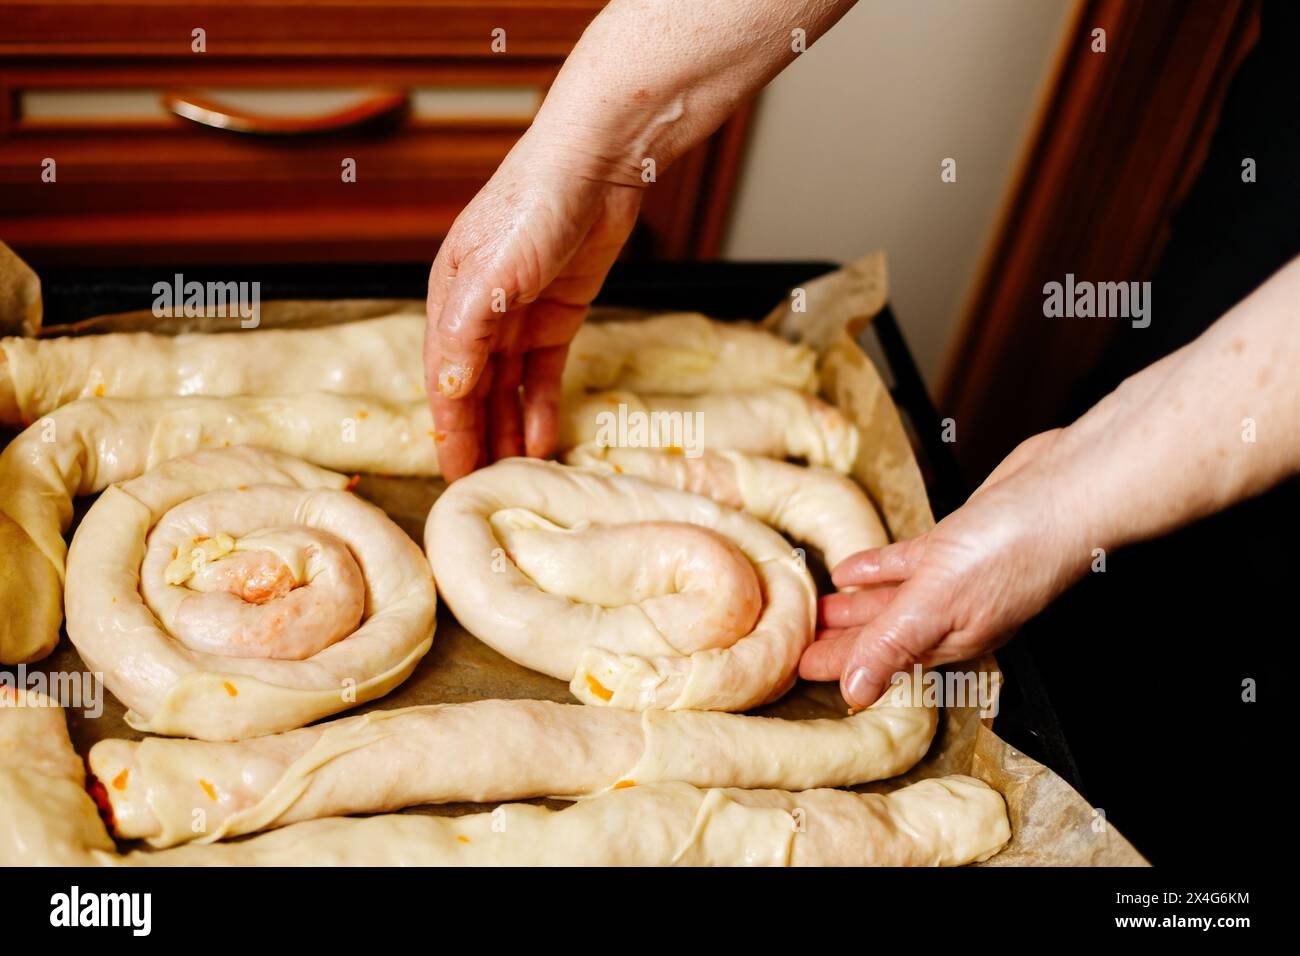 Person preparing pastries from dough with pumpkin Stock Photo